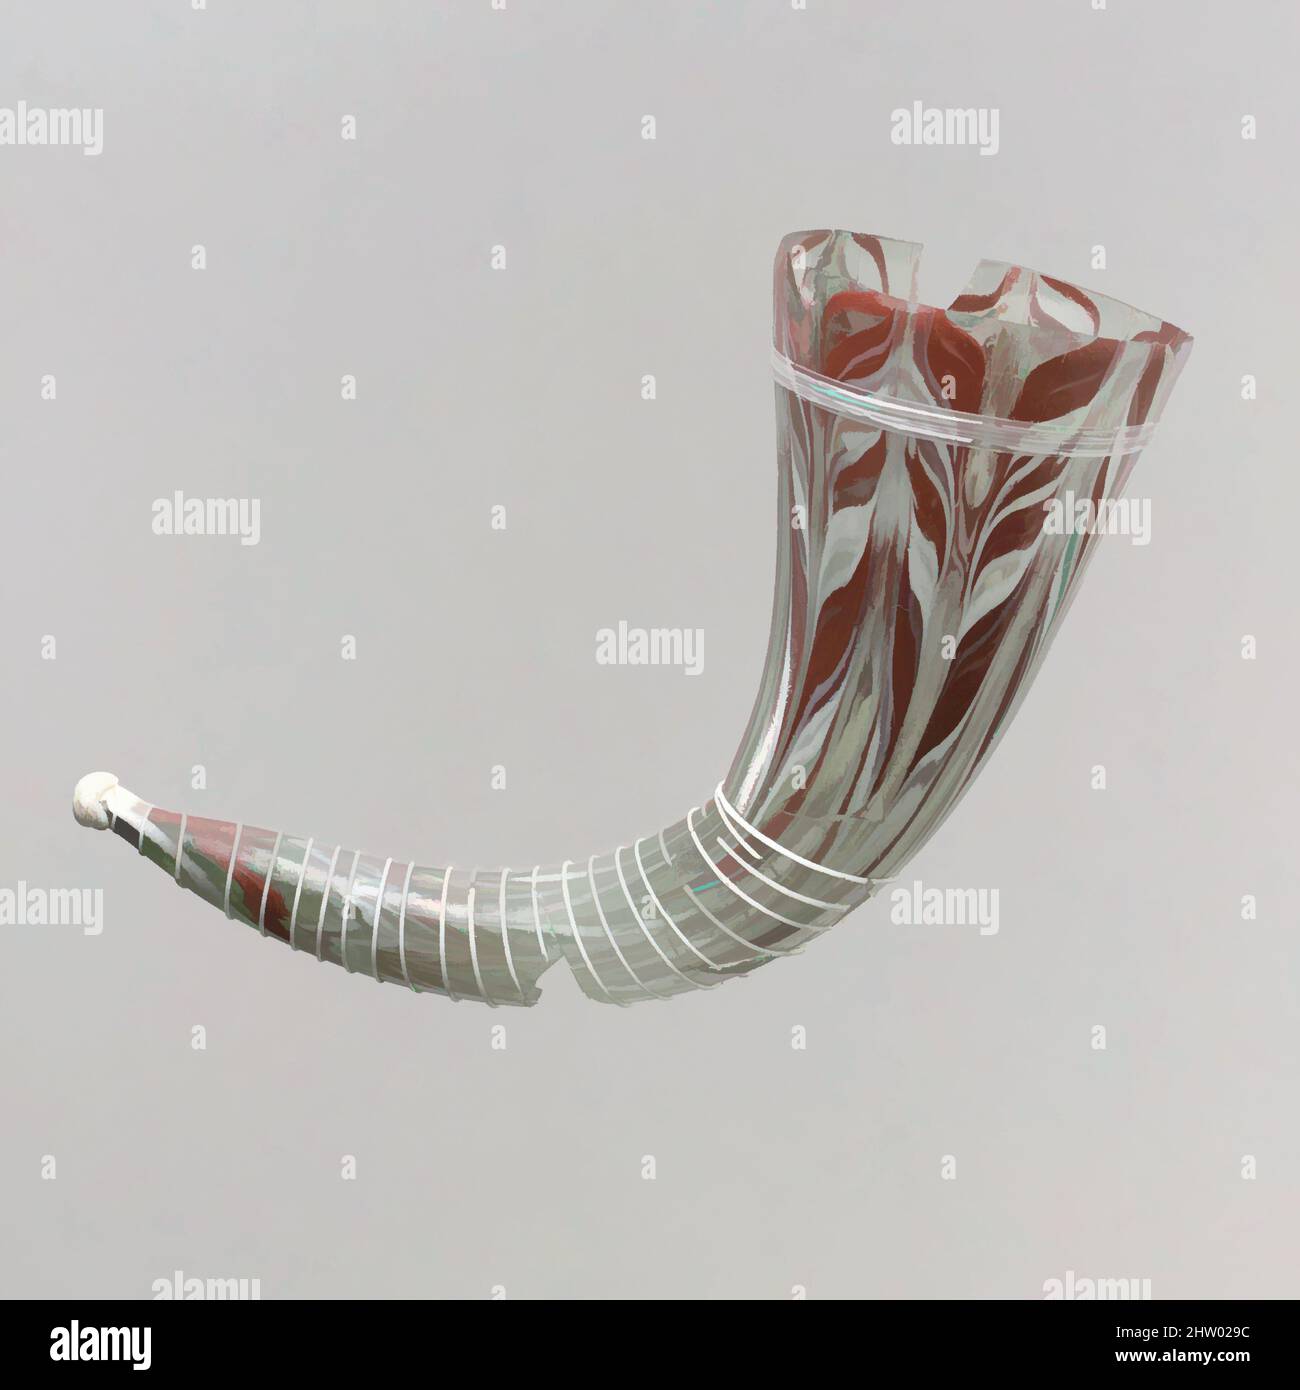 Art inspired by Glass Drinking Horn, 575–625, Made in Italy (North), Langobardic (?), Glass, 8 1/4 x 2 3/4 in. (21 x 7 cm), Glass-Vessels, While contemporaneous Frankish glass vessels tend to be in natural colors of light green or brown, Langobardic glassware makes use of vivid colors, Classic works modernized by Artotop with a splash of modernity. Shapes, color and value, eye-catching visual impact on art. Emotions through freedom of artworks in a contemporary way. A timeless message pursuing a wildly creative new direction. Artists turning to the digital medium and creating the Artotop NFT Stock Photo